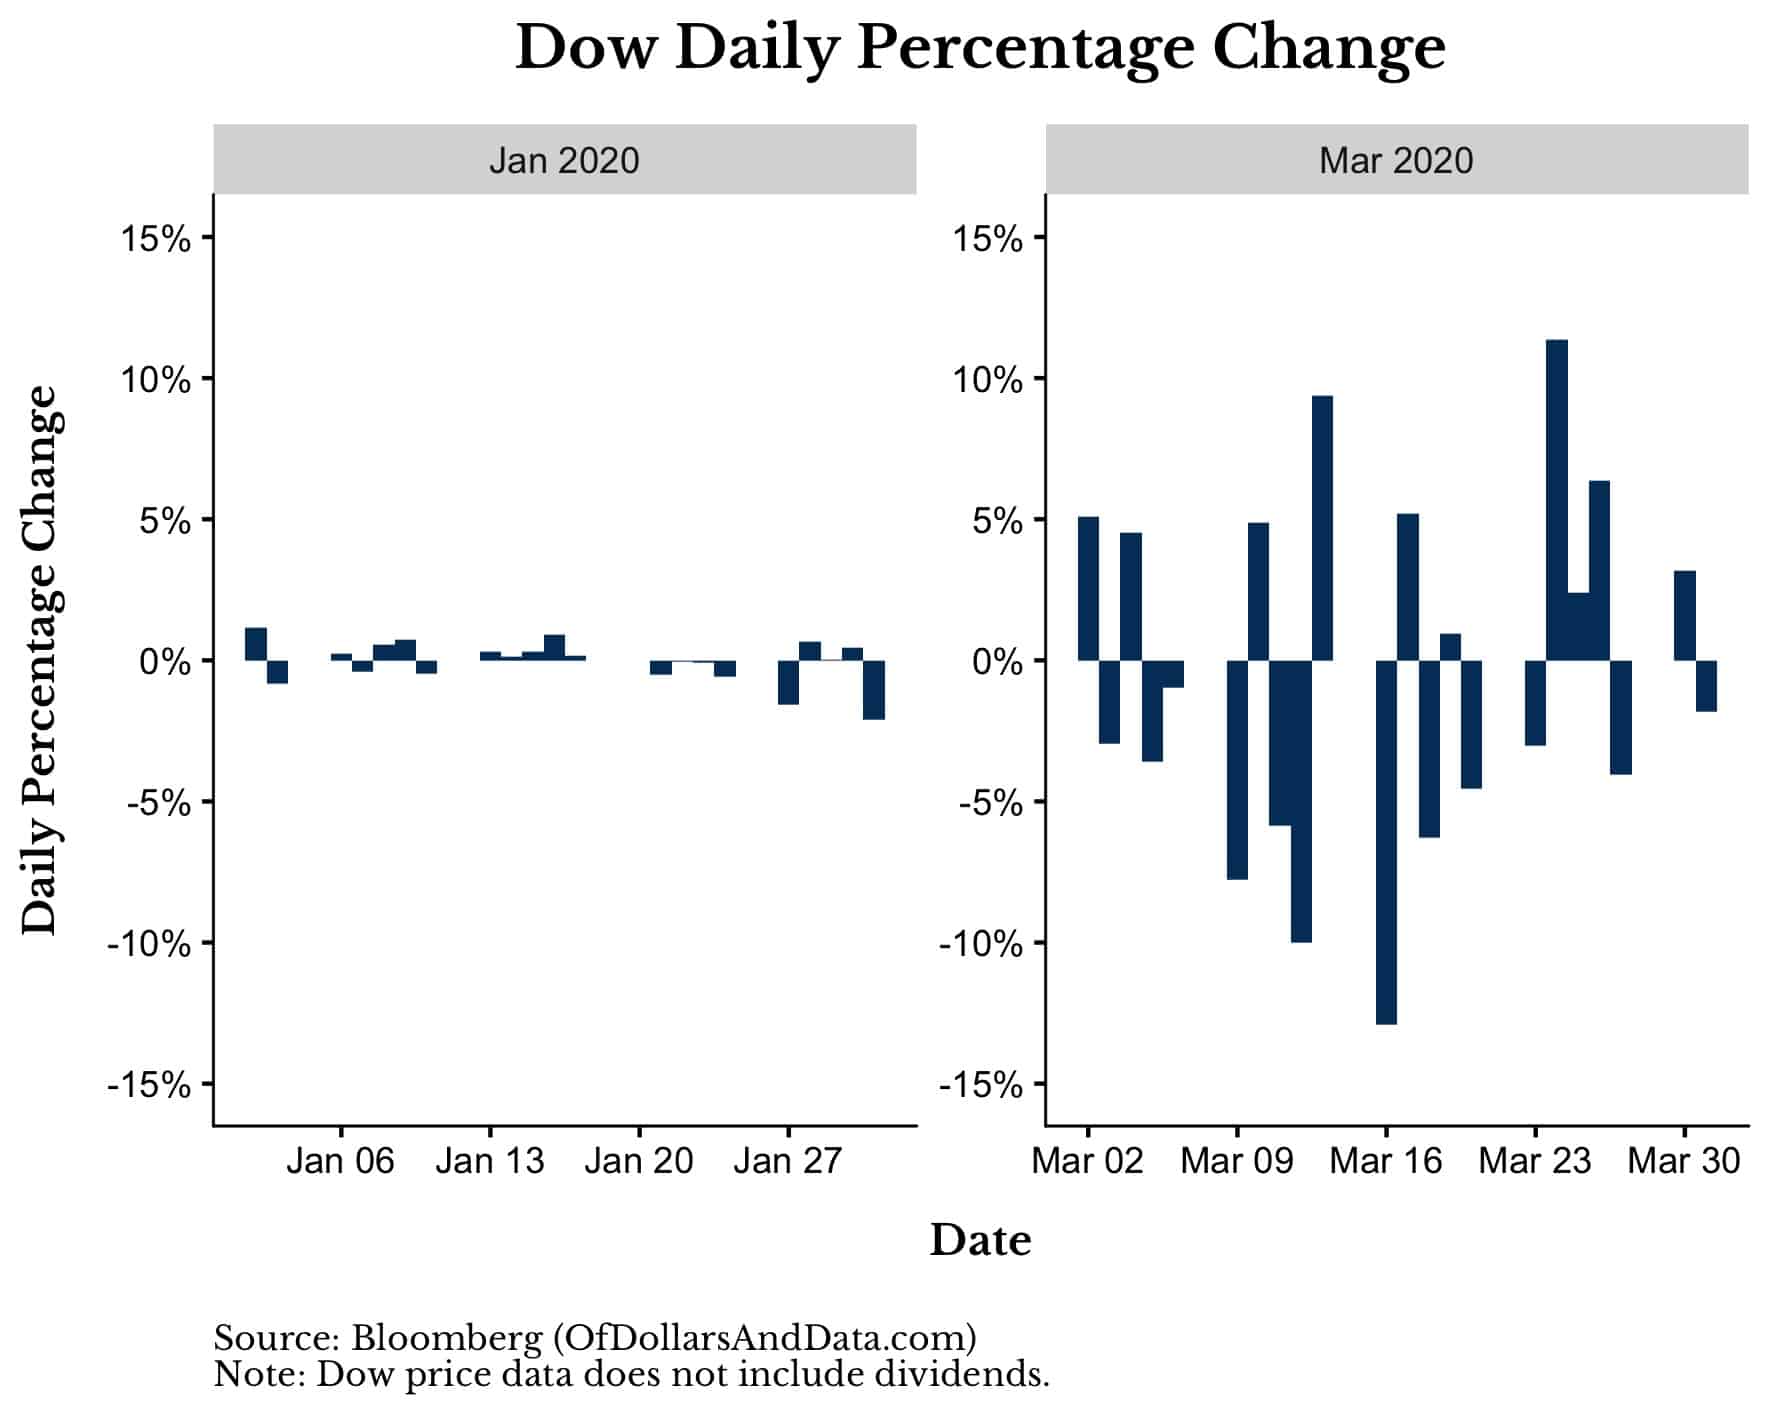 Dow Jones Industrial Average daily percentage change in Jan 2020 and March 2020